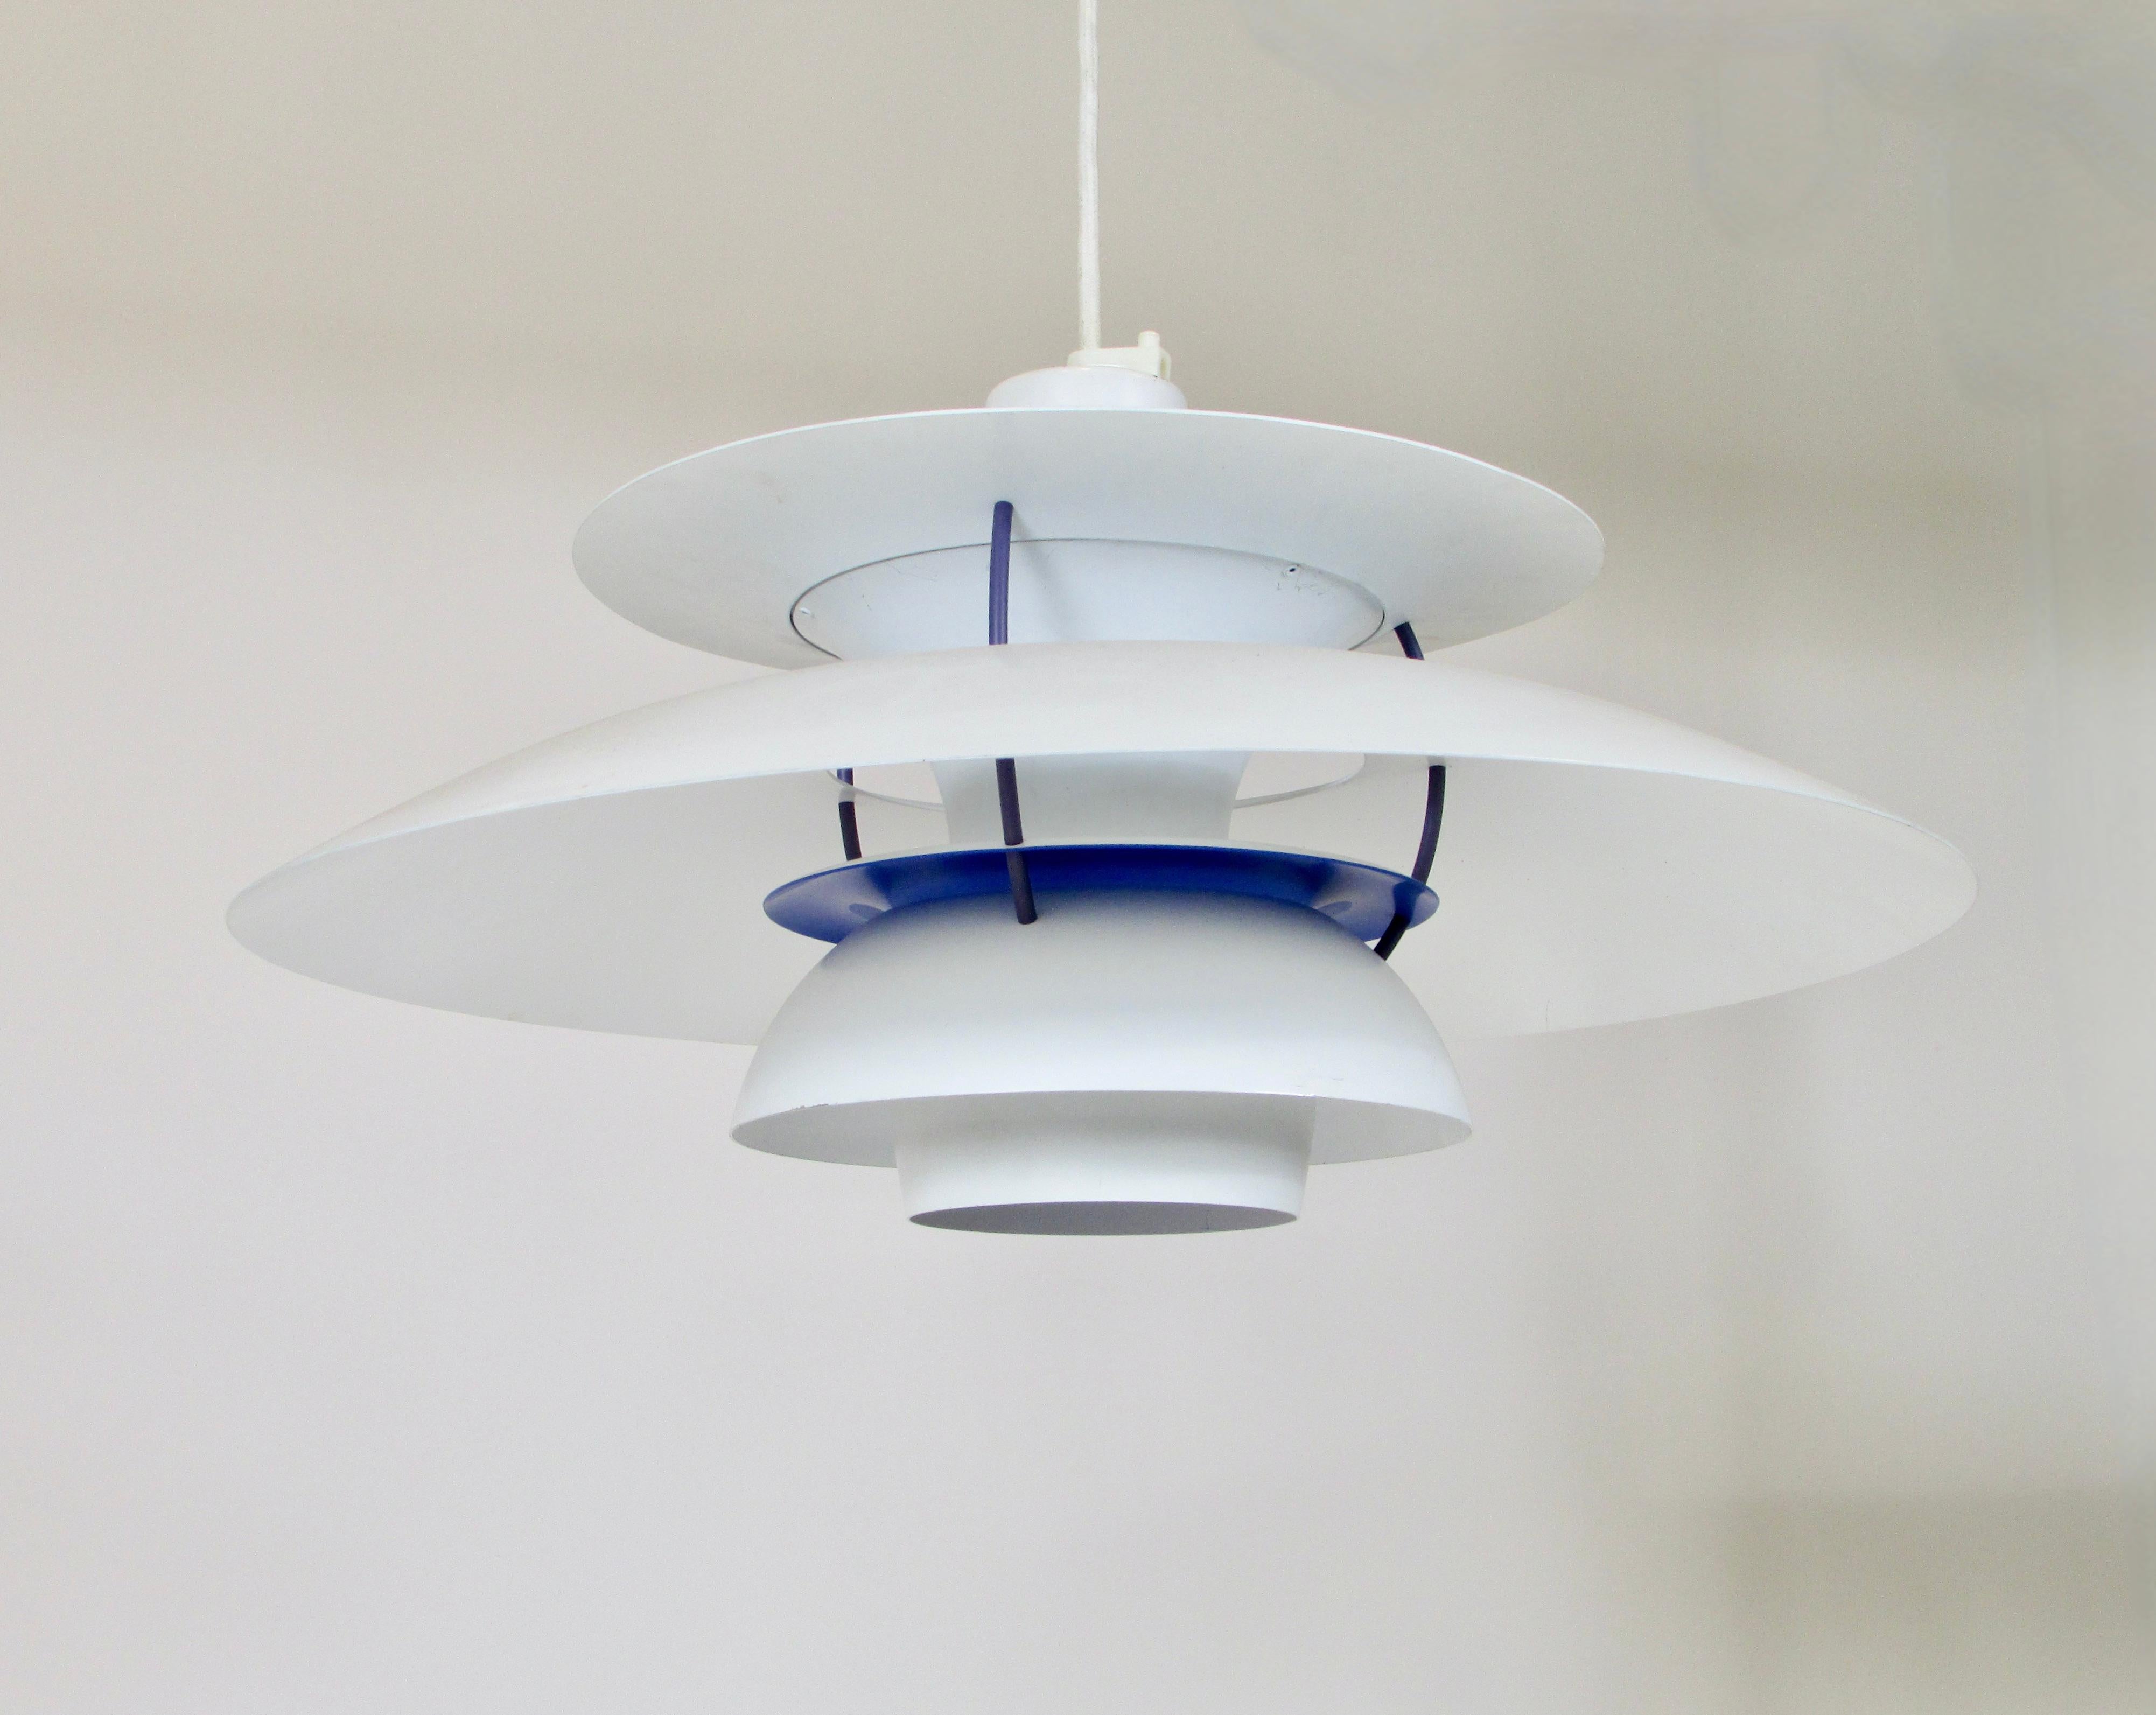 PH5 pendant by Poul Henningsen for Louis Poulsen Denmark. White with blue, iconic pendant by Poul Henningsen multiple levels of rounded aluminium create a soft shadow play. Most light falls downwards, but also horizontally there is a gentle light